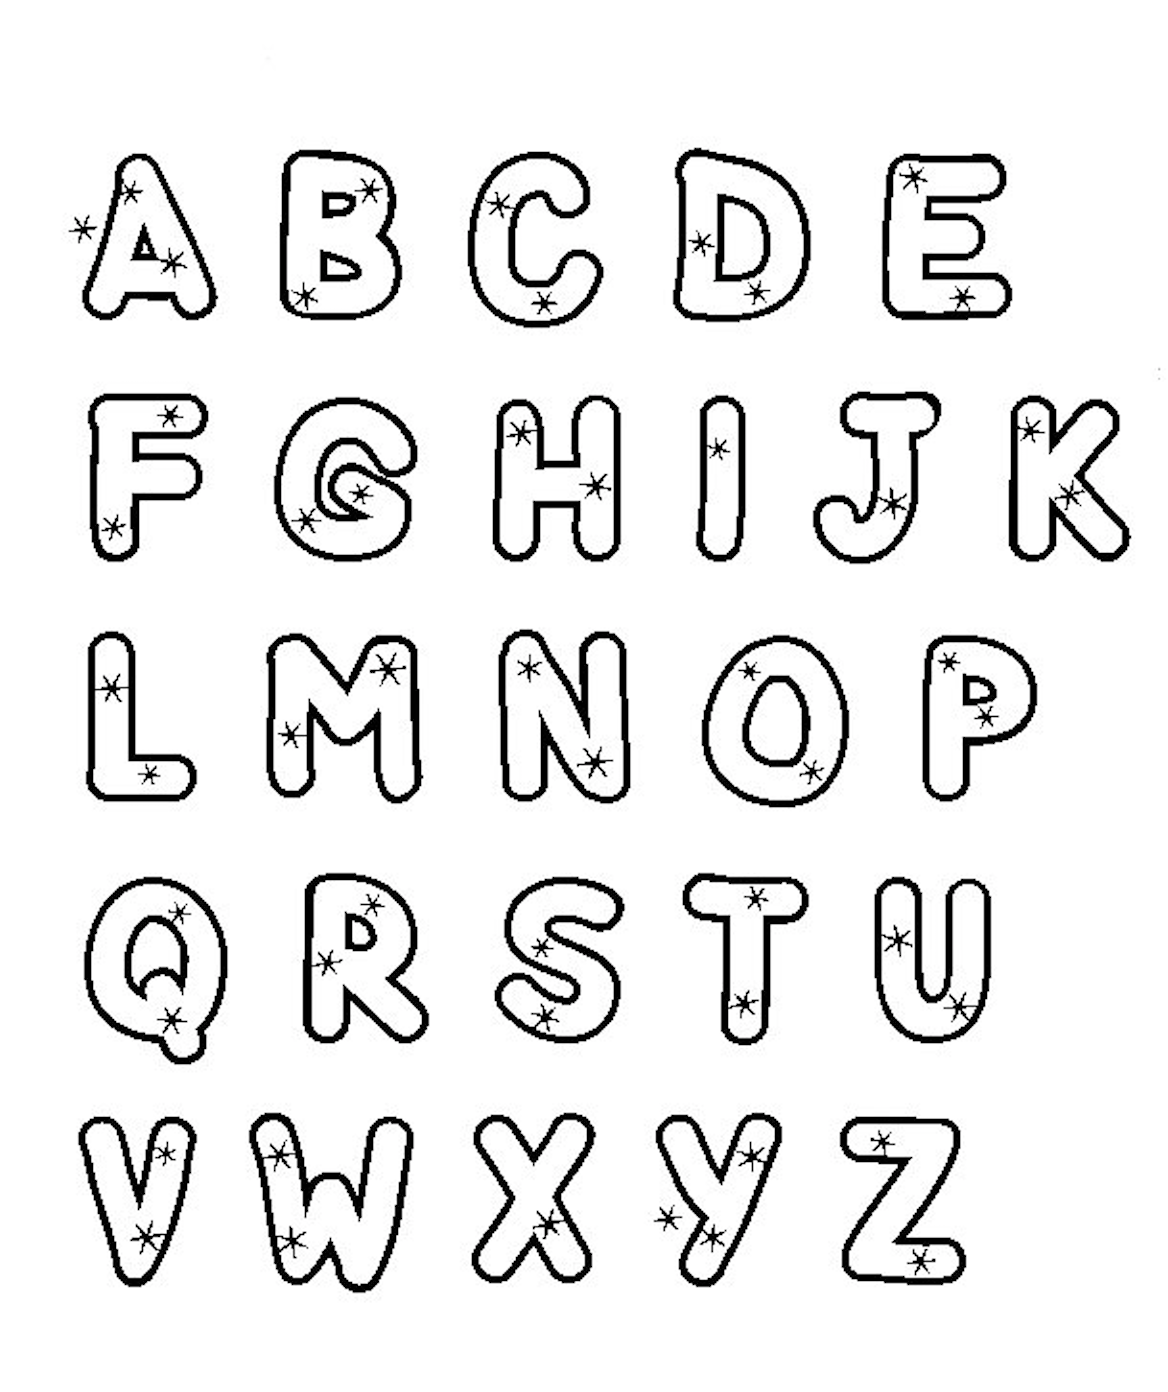 Alphabet Coloring Pages A-Z for Kids FREE Printable - COLORING PAGES